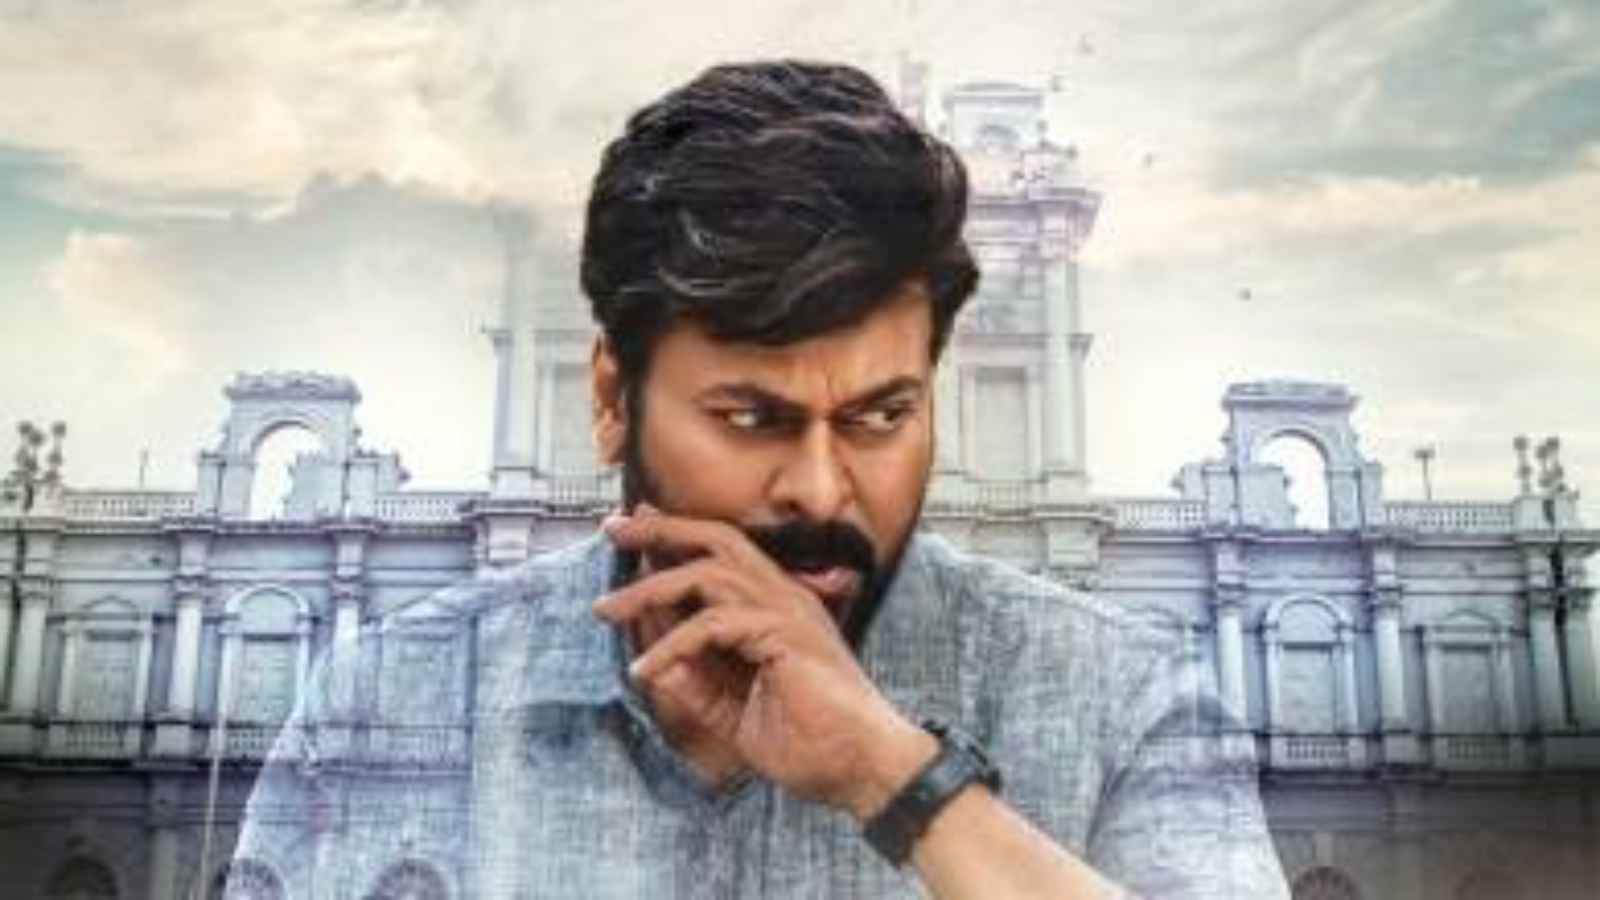 Chiranjeevi's 'Godfather' earns Rs 38 crore in worldwide collection on day one